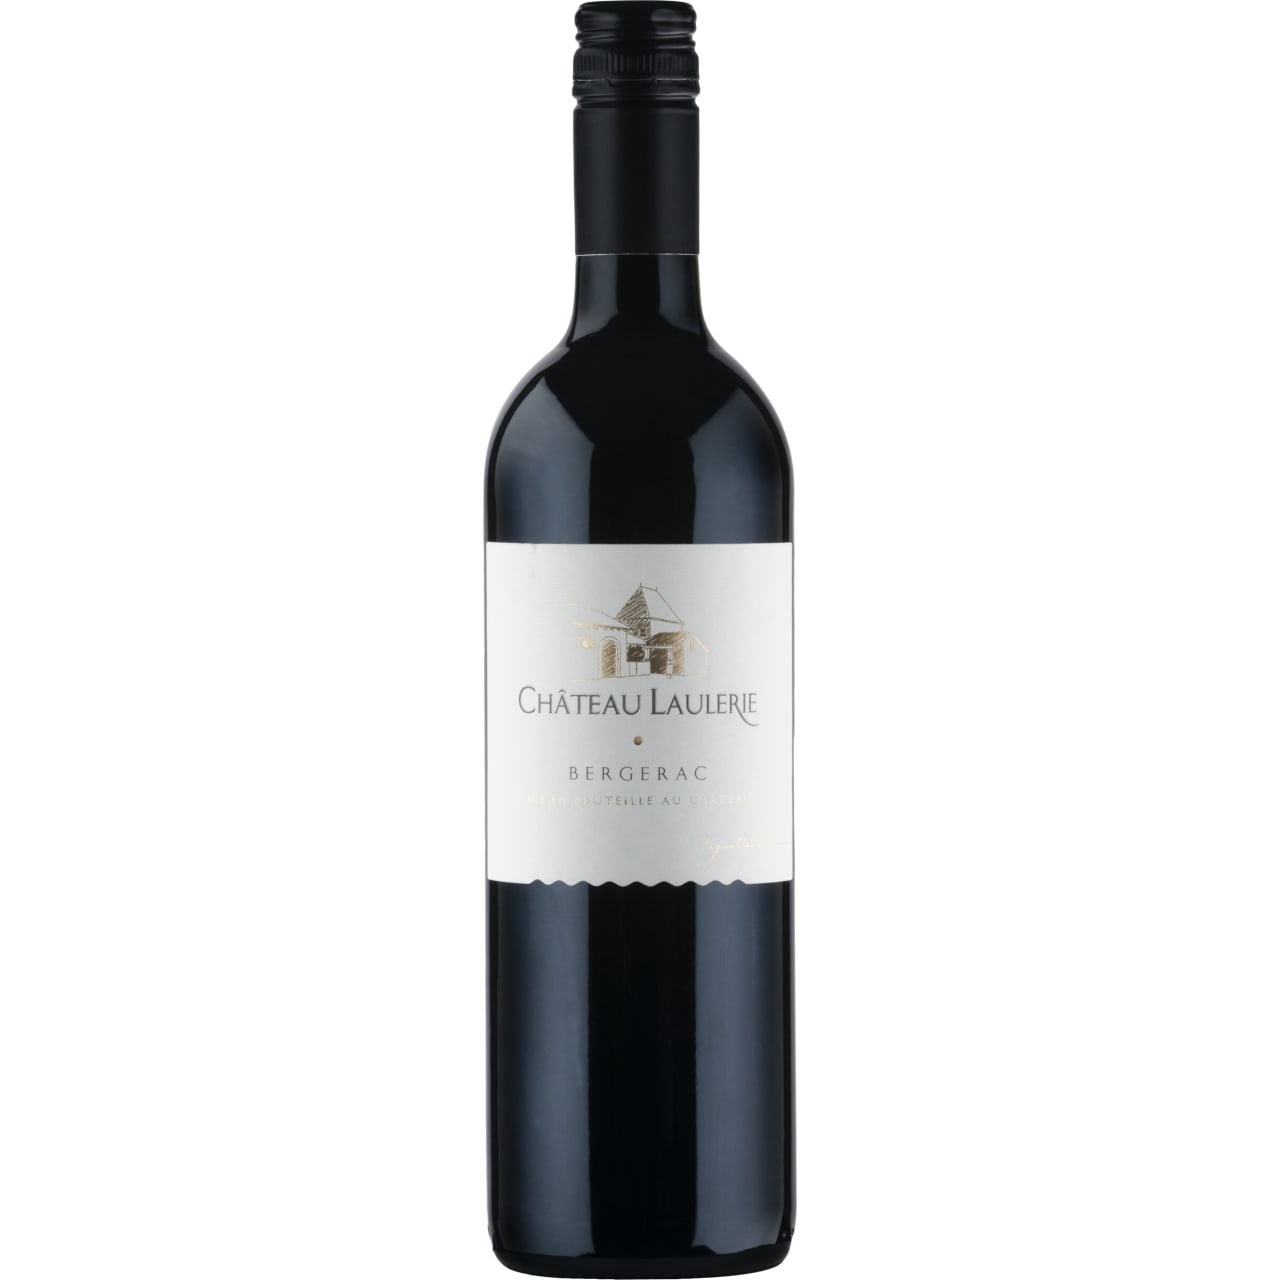 Lively red fruit with a hint of pepper characterise this supple velvety Merlot.